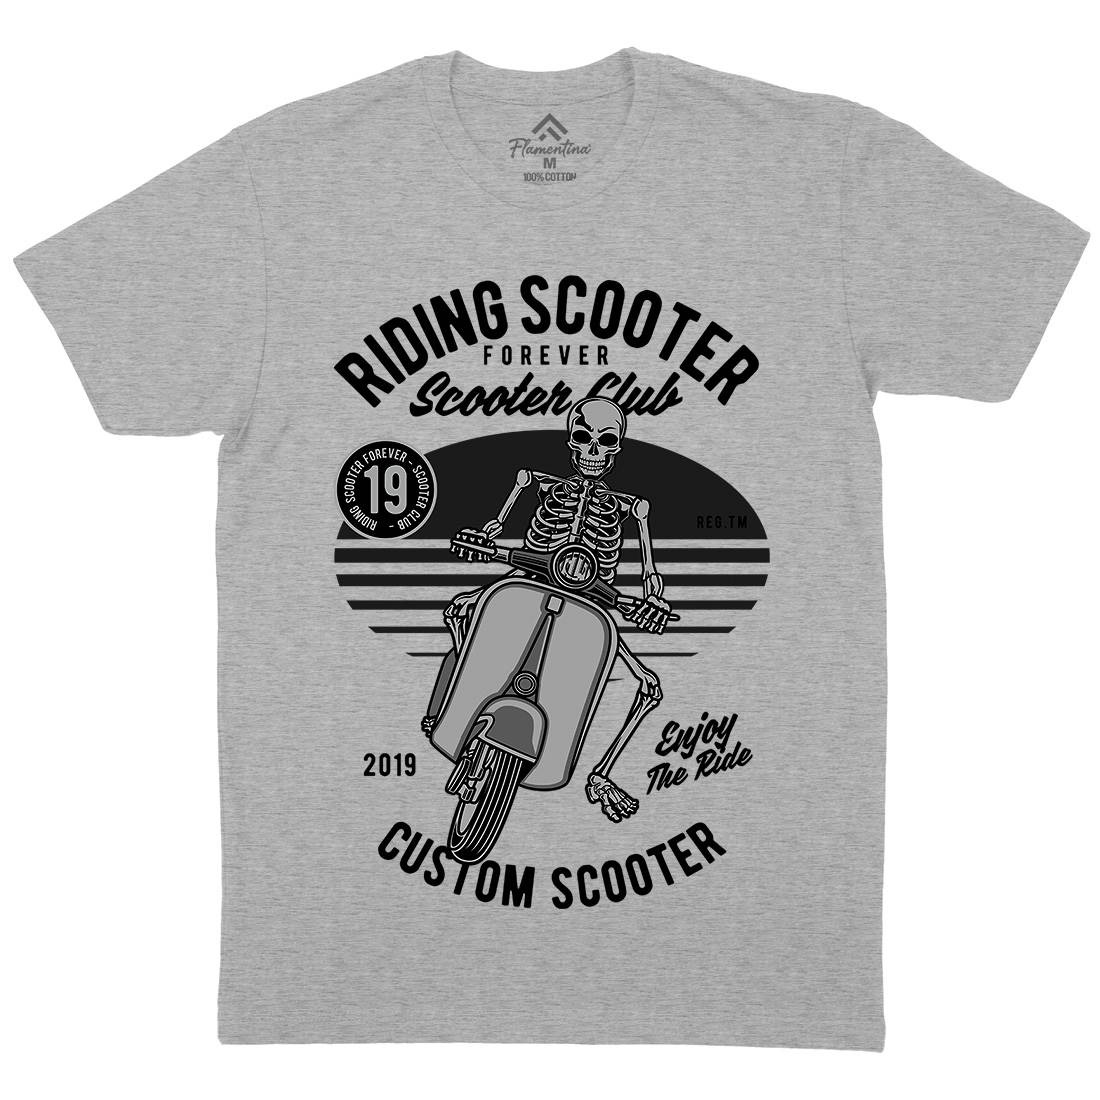 Riding Scooter Mens Organic Crew Neck T-Shirt Motorcycles D570